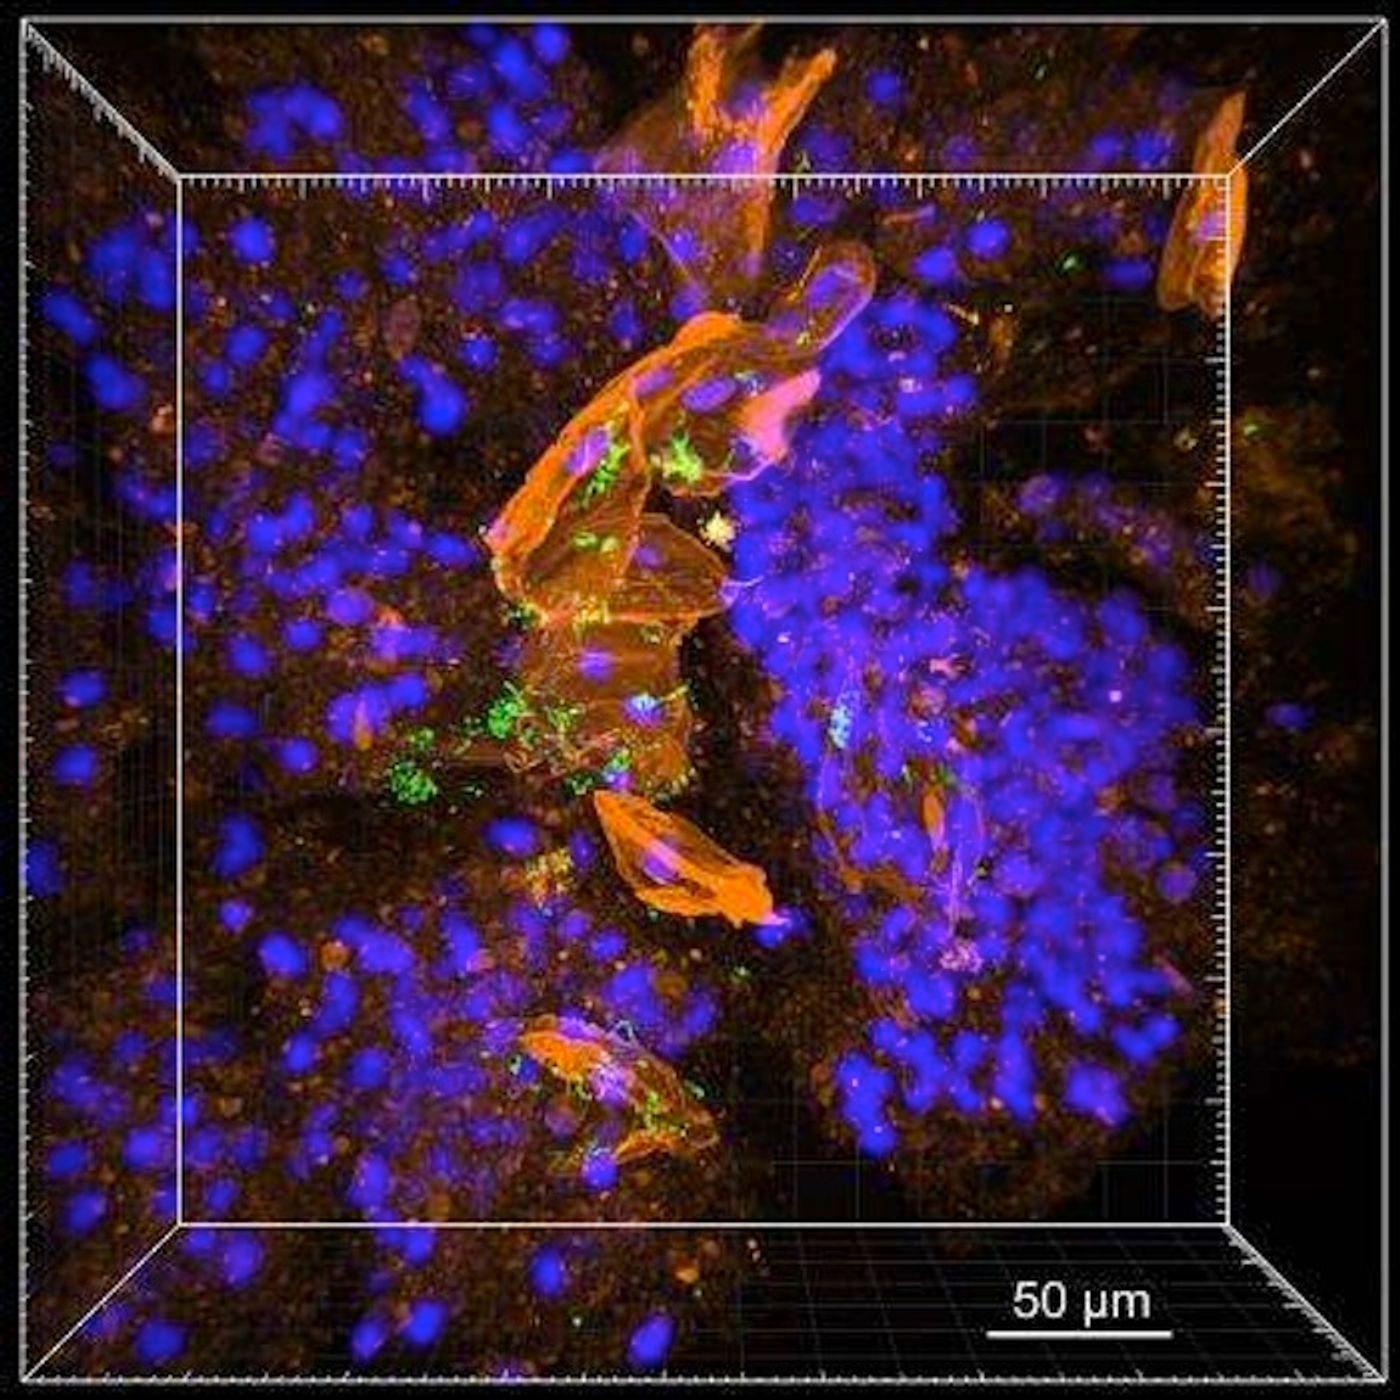 MiPACT-HCR, a tissue clearing technique designed for bacterial retention and identification, was applied to a sputum sample from a CF patient. Confocal microscopy of cleared sputum revealed that Streptococcus (green) aggregated around host cells stained with WGA lectin (orange). DAPI (blue) is host cell nuclei. / Credit: Gradinaru and Newman Laboratories/Caltech